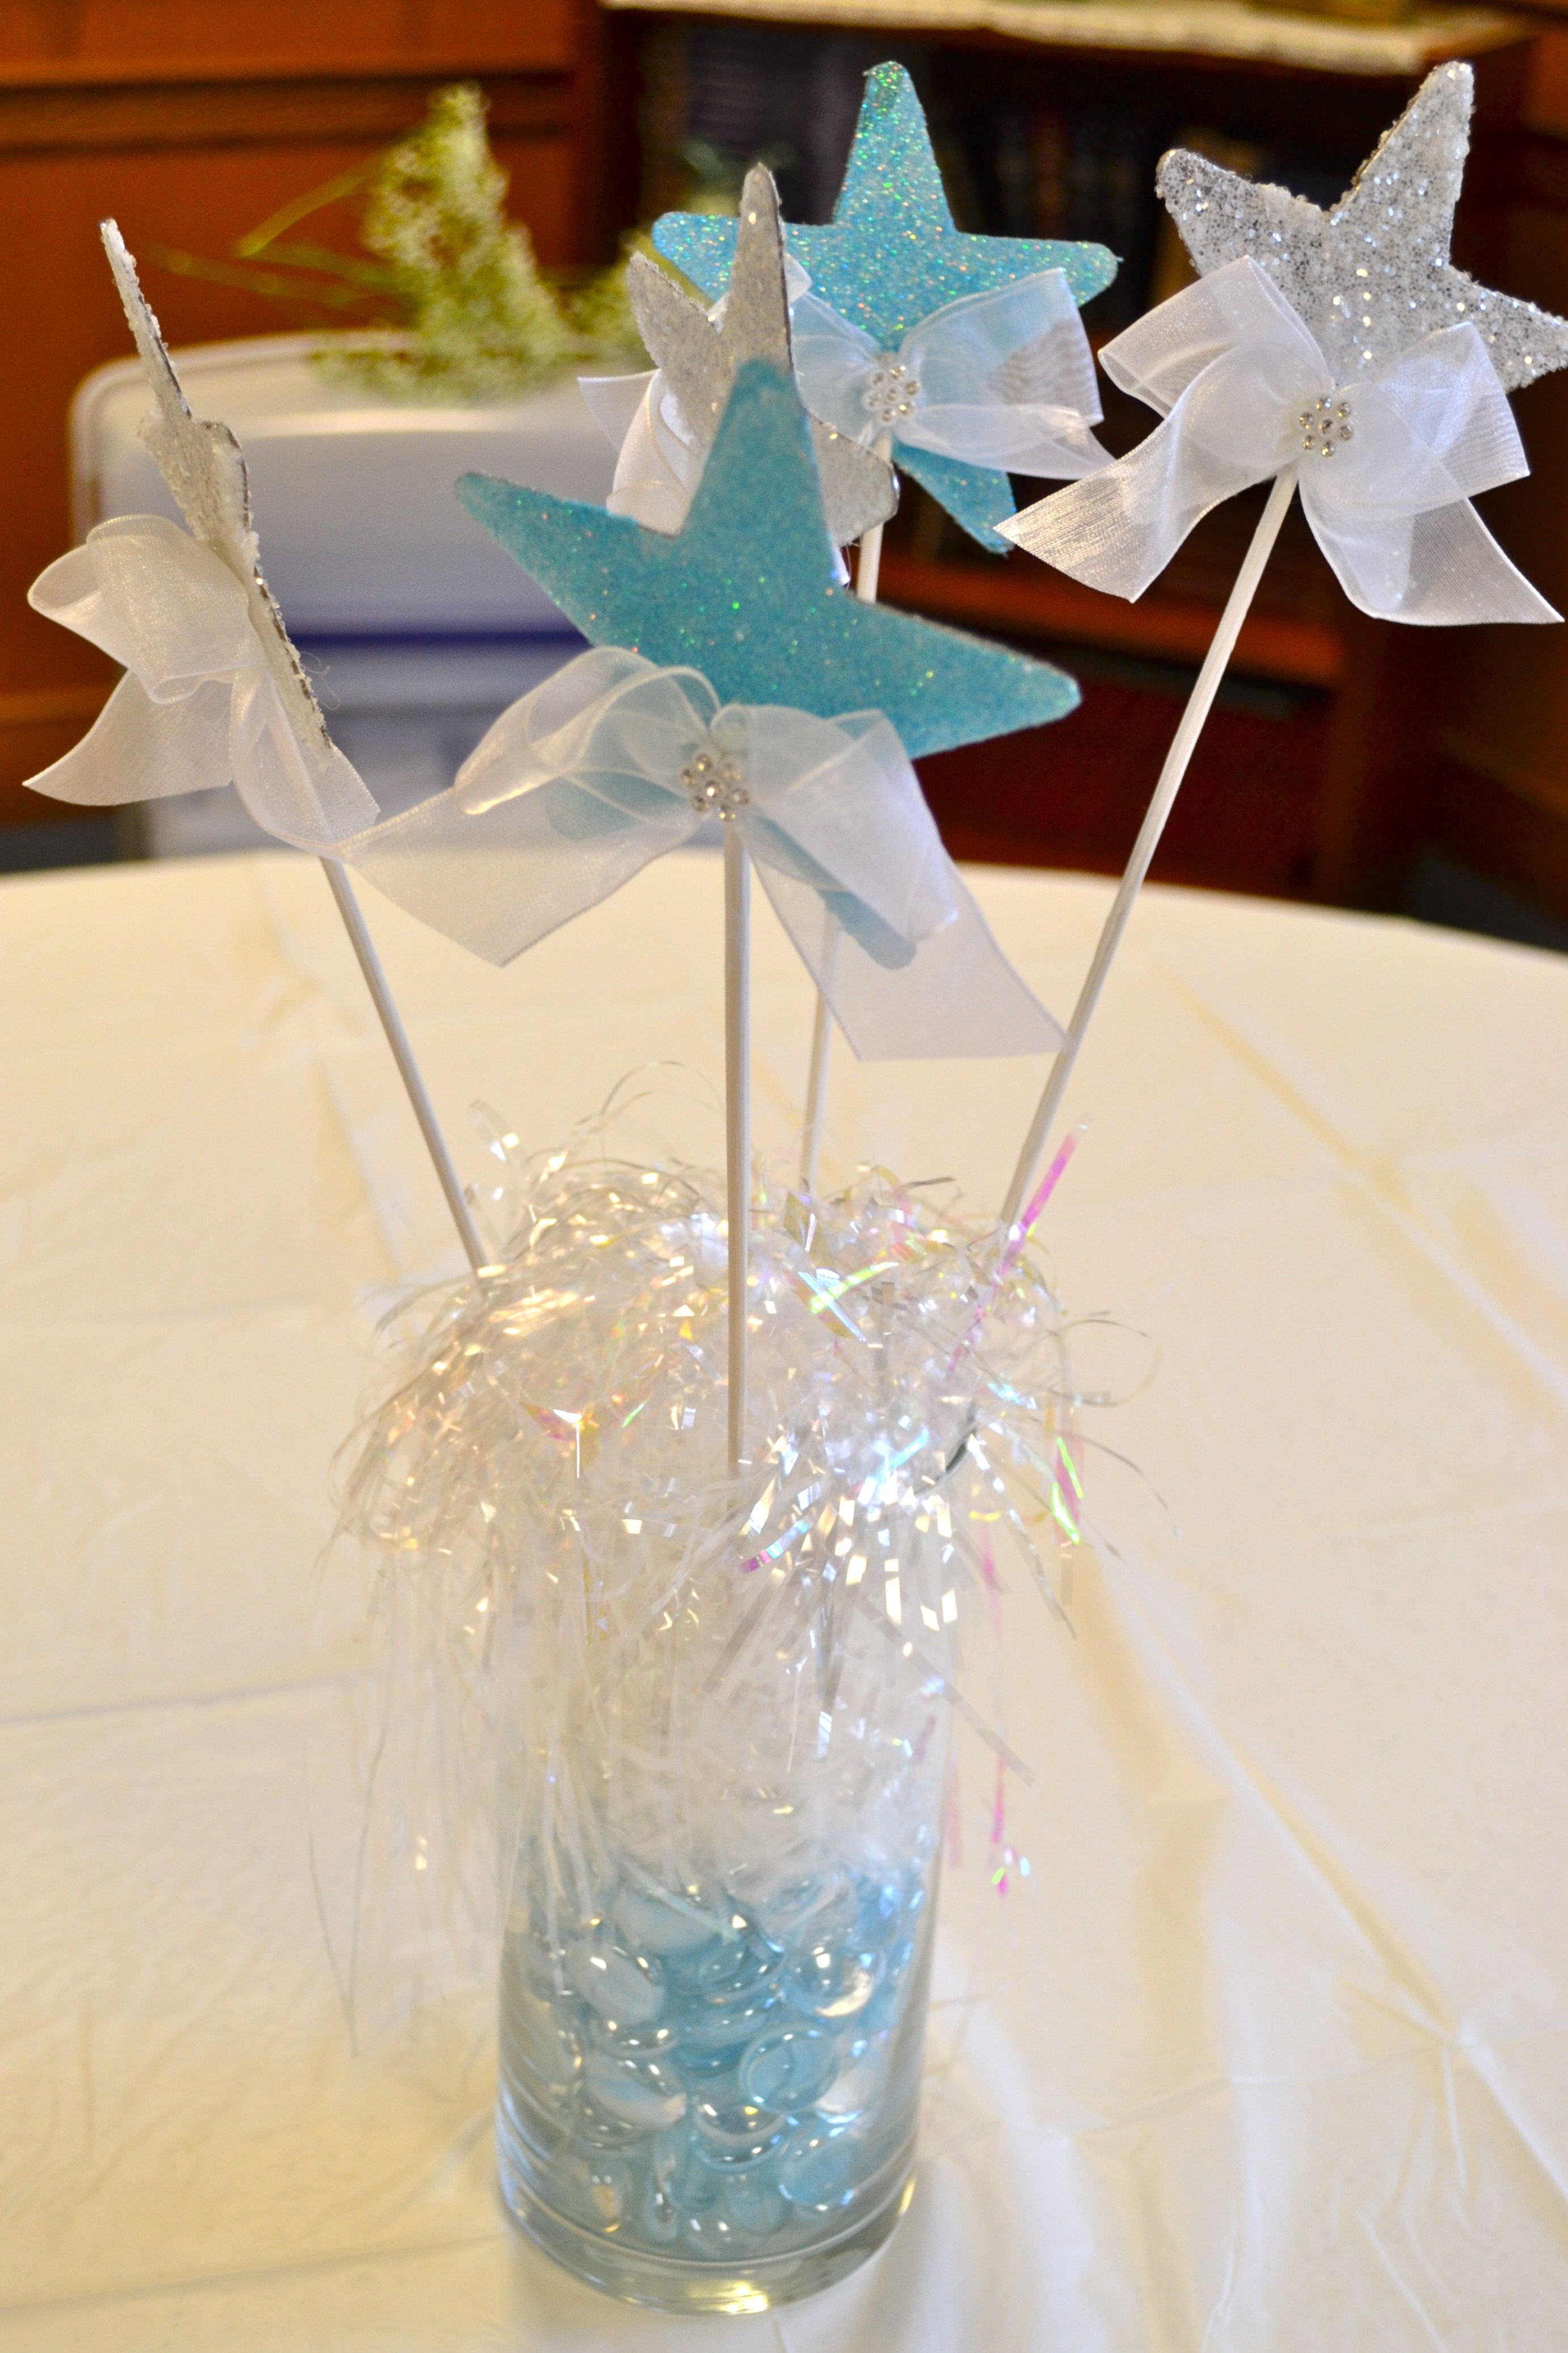 11 Great 30 Inch Tall Glass Vases 2024 free download 30 inch tall glass vases of little star centerpieces empty glass vase filled with silver in little star centerpieces empty glass vase filled with silver white and blue shiny stuff attach sta